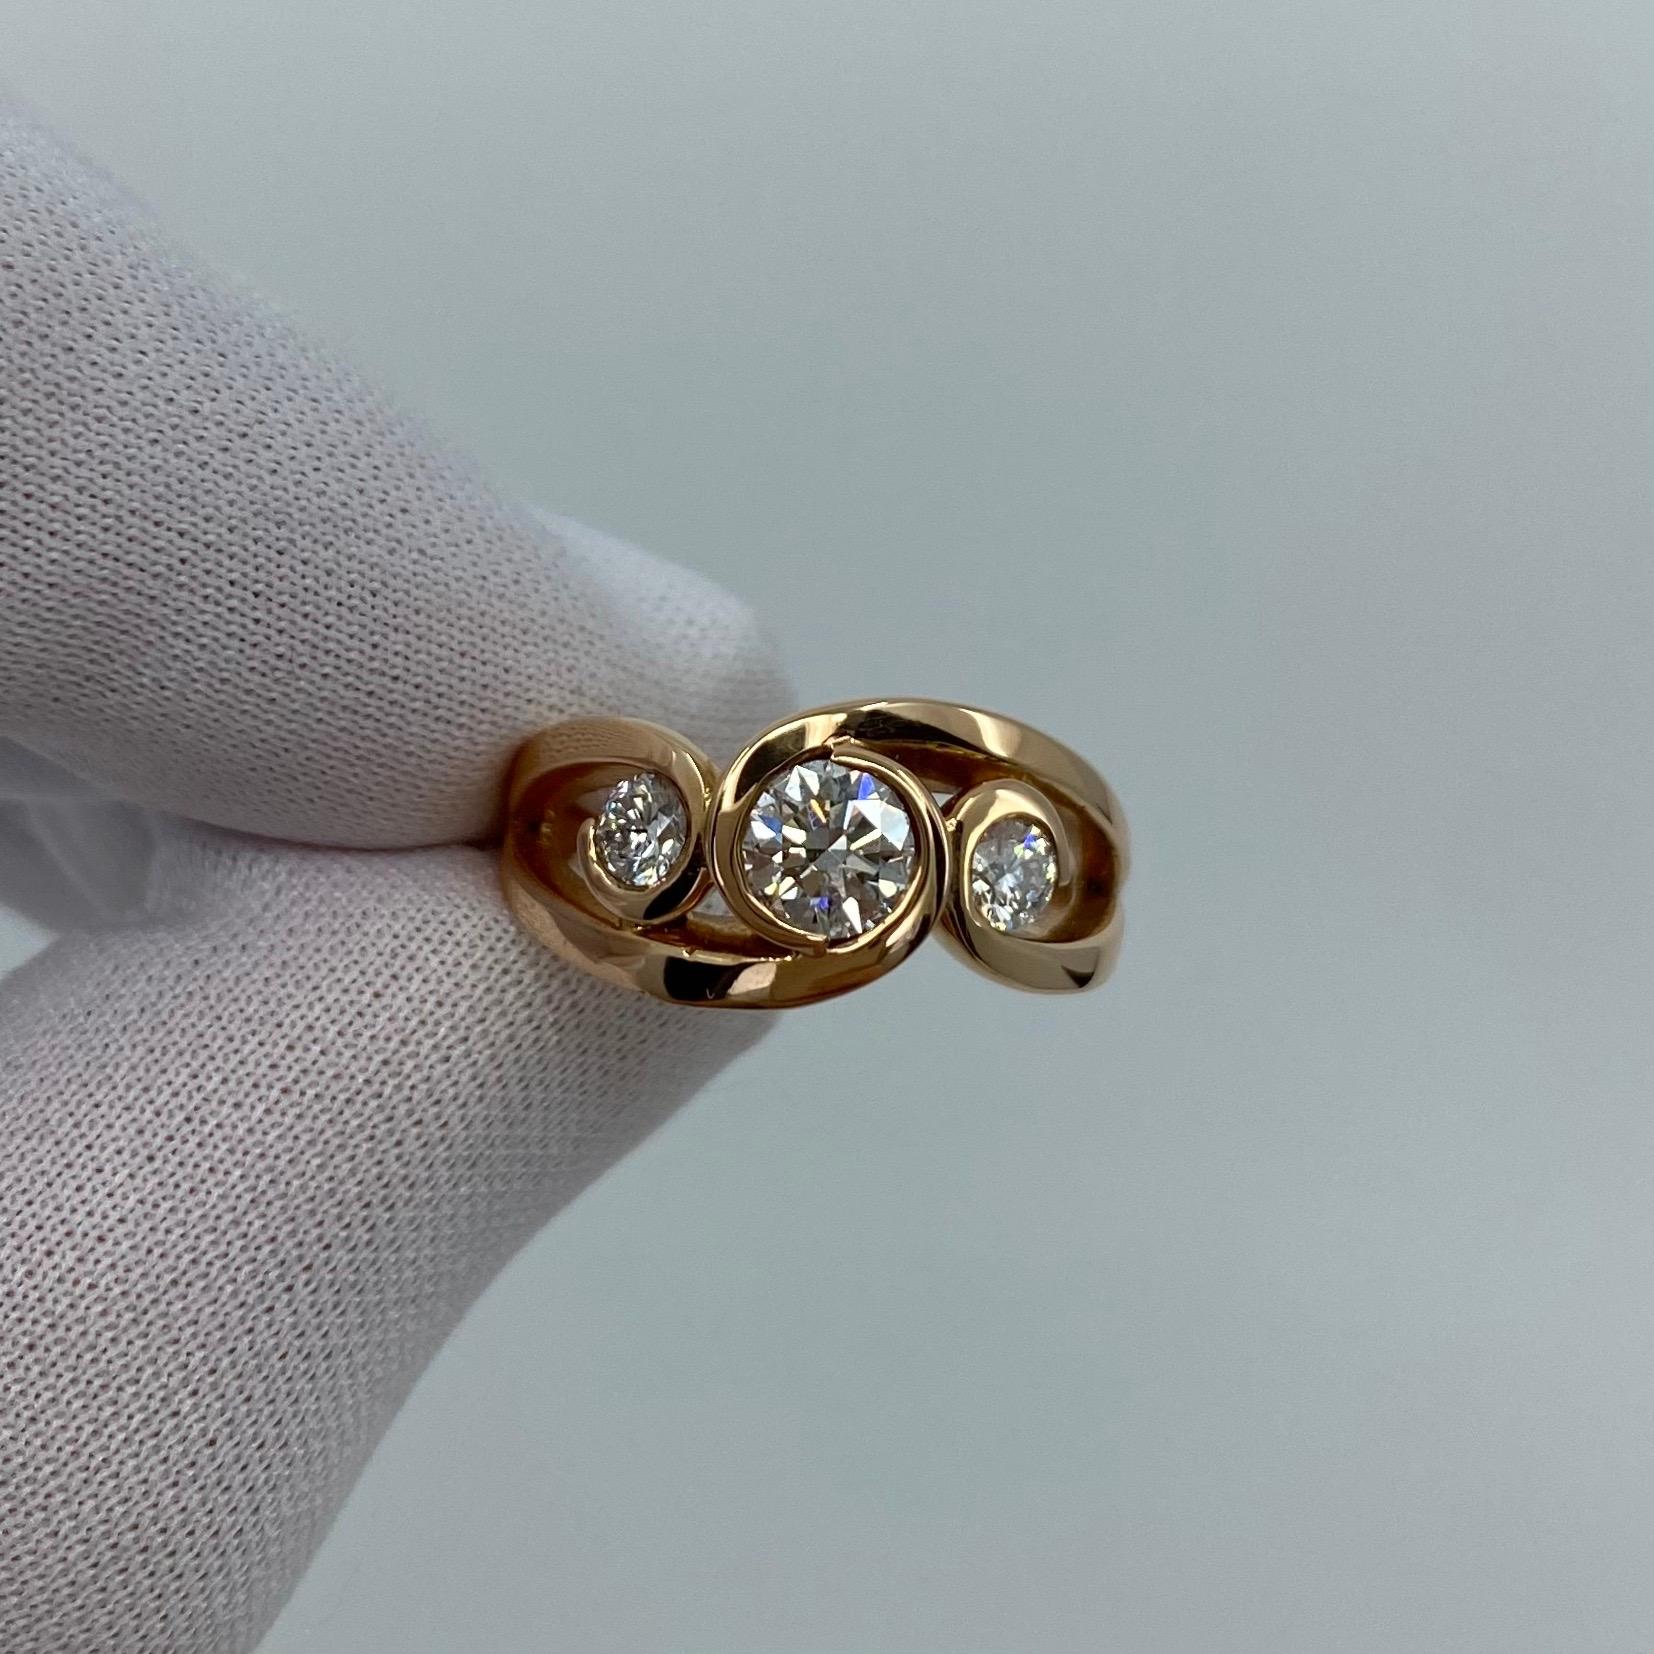 18k Rose Gold Diamond Three Stone Ring

A stunning 18 Karat rose gold diamond ring with 3 beautiful white diamonds in a unique swirl scroll style. 
The diamonds are approx Si1-Si2 Clarity and G/H Colour. Centre stone is 0.50ct with the two side